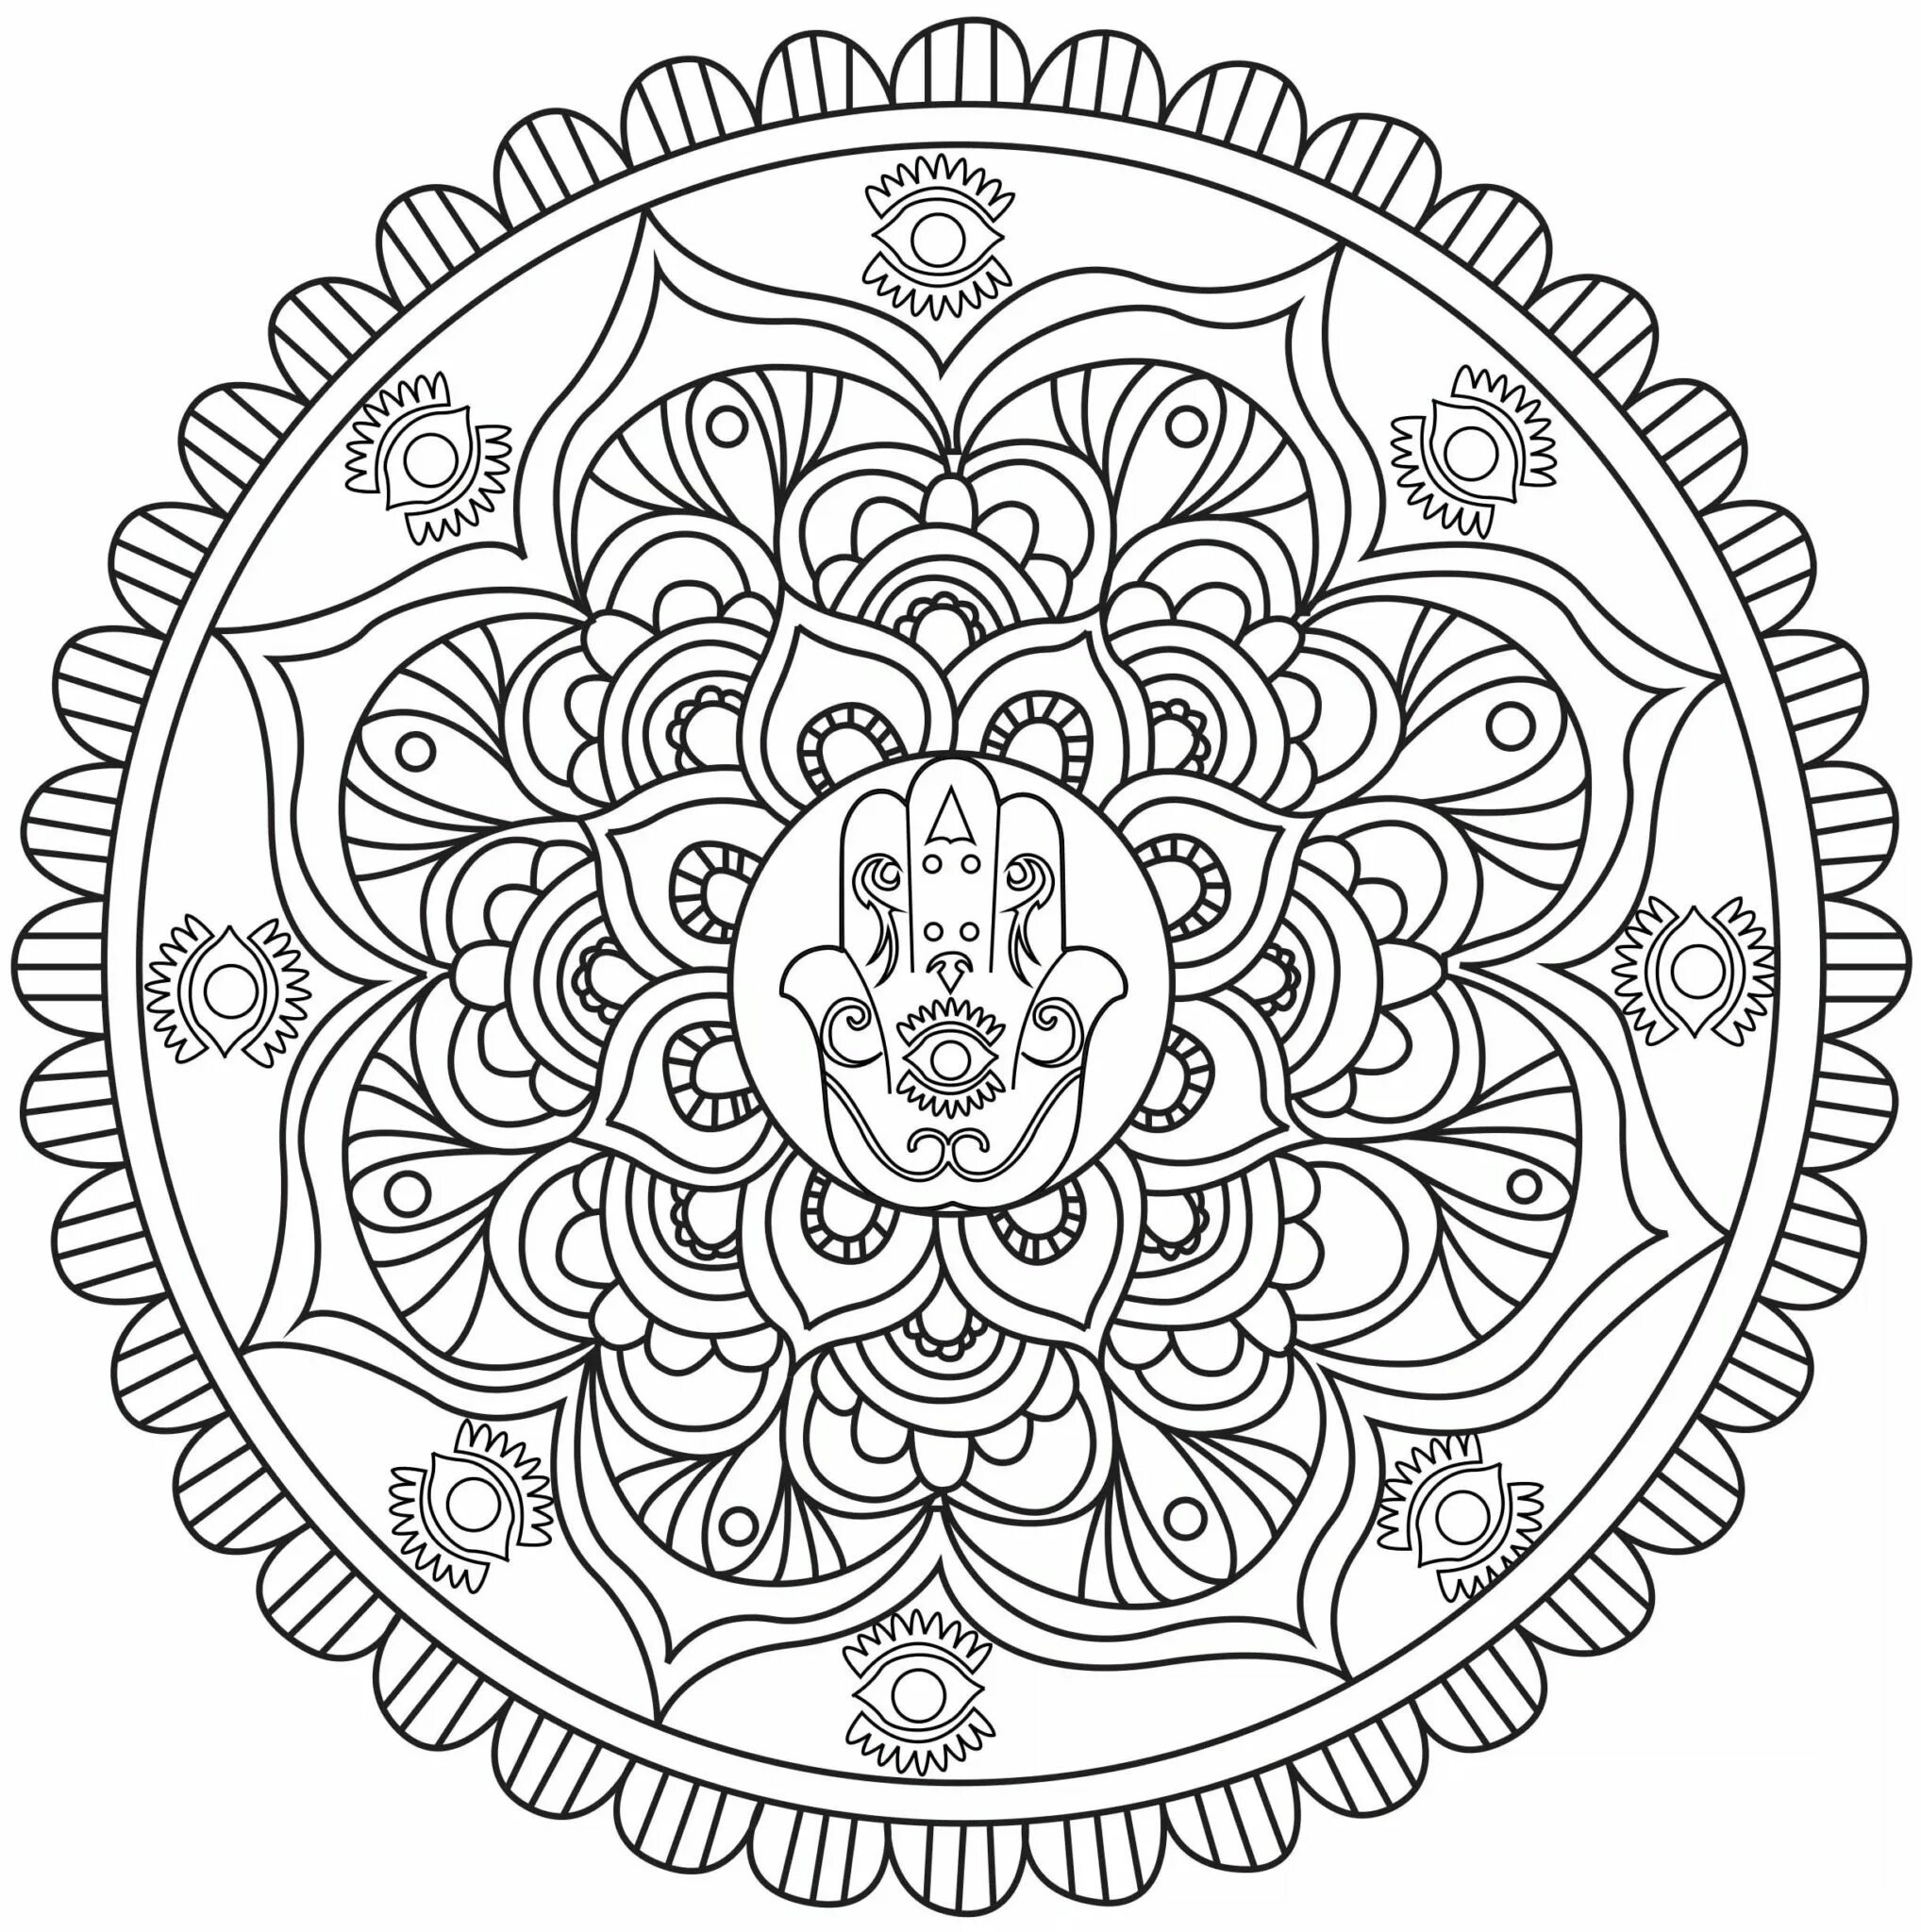 Palace coloring mandala for prosperity and achievement